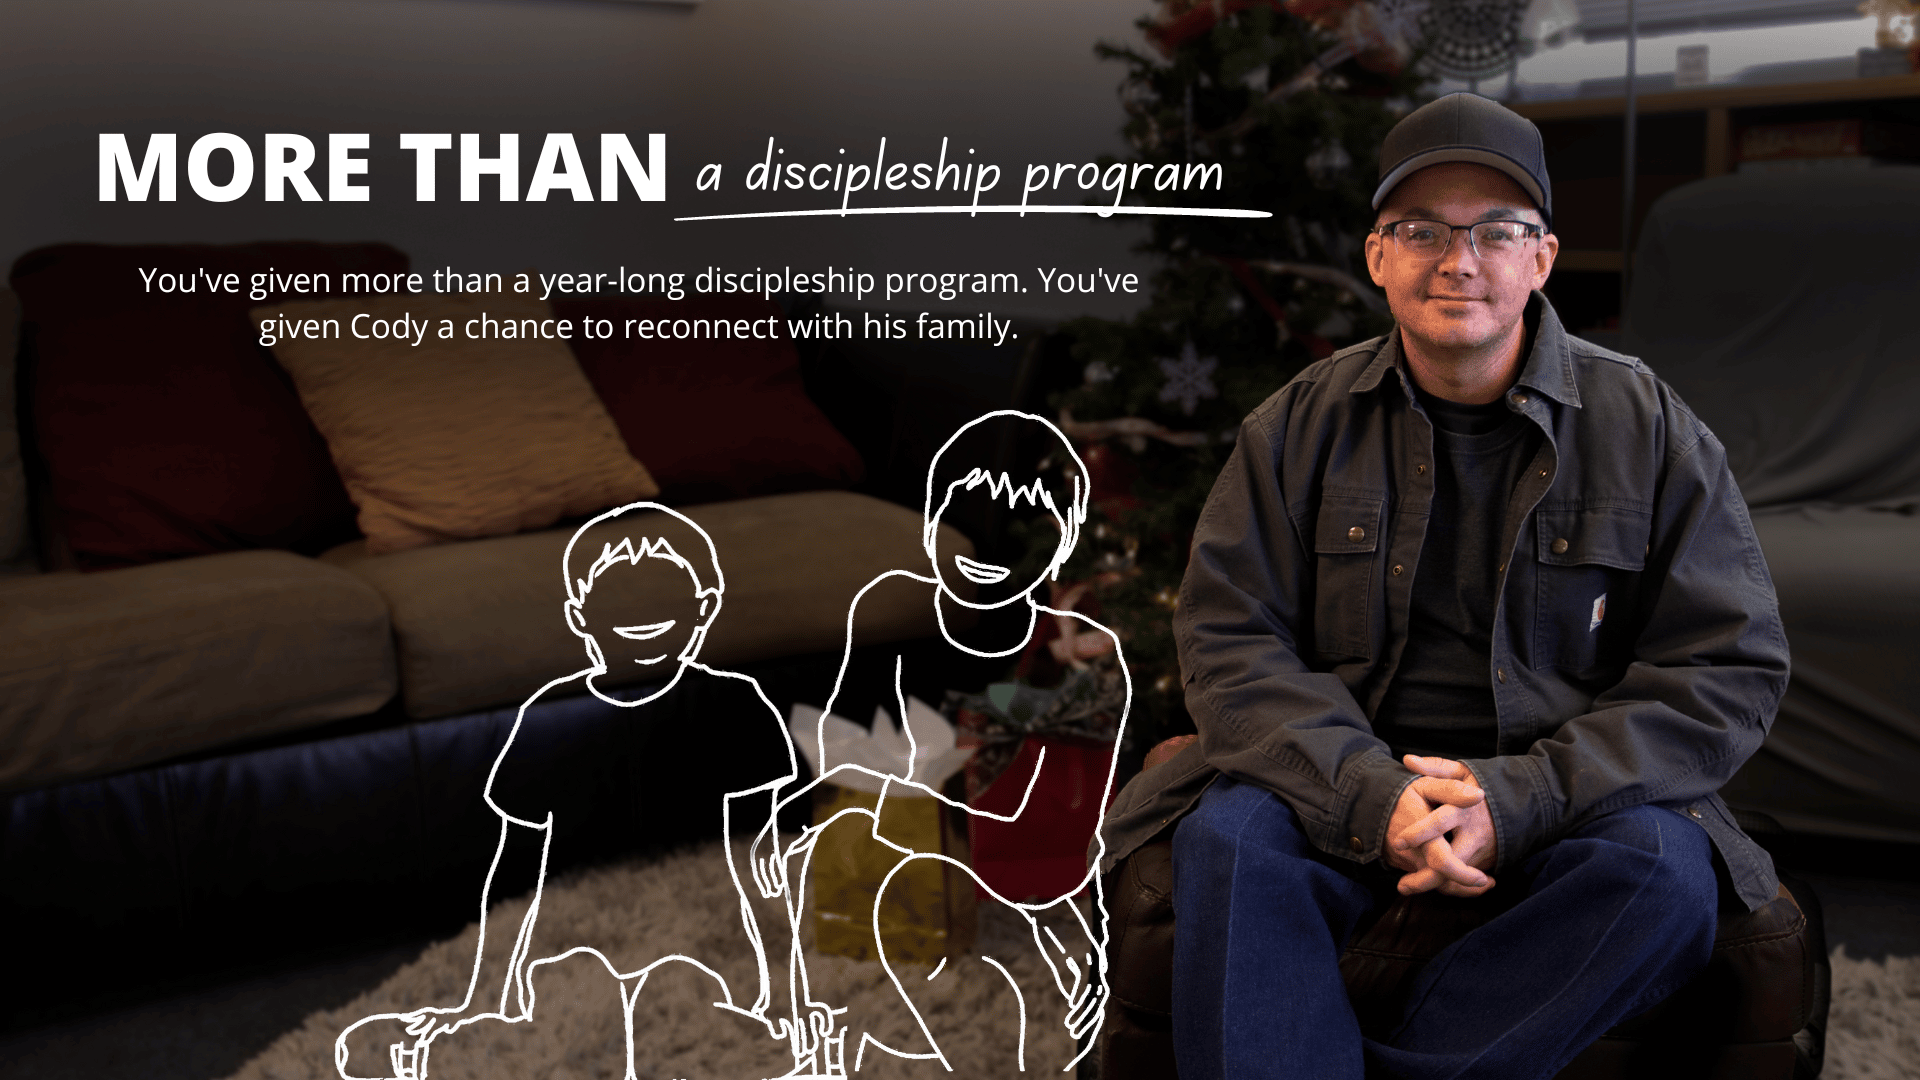 More than a discipleship program: You've given Cody a chance to reconnect with his family